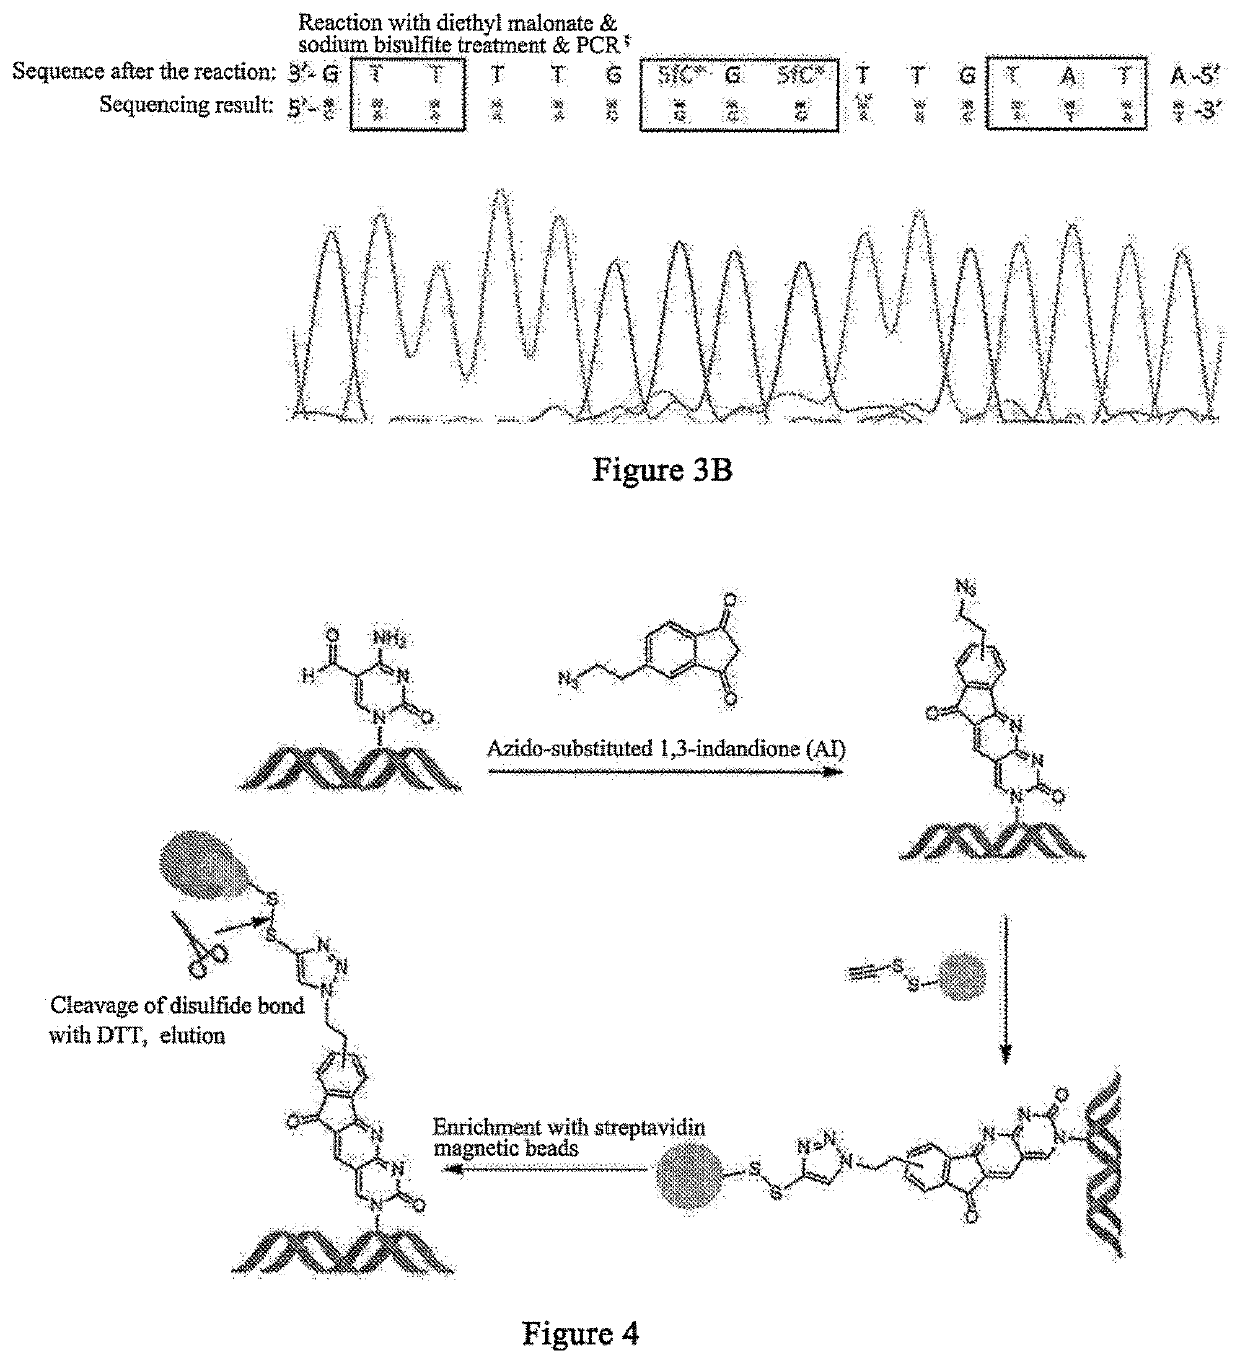 5-formylcytosine specific chemical labeling method and related applications